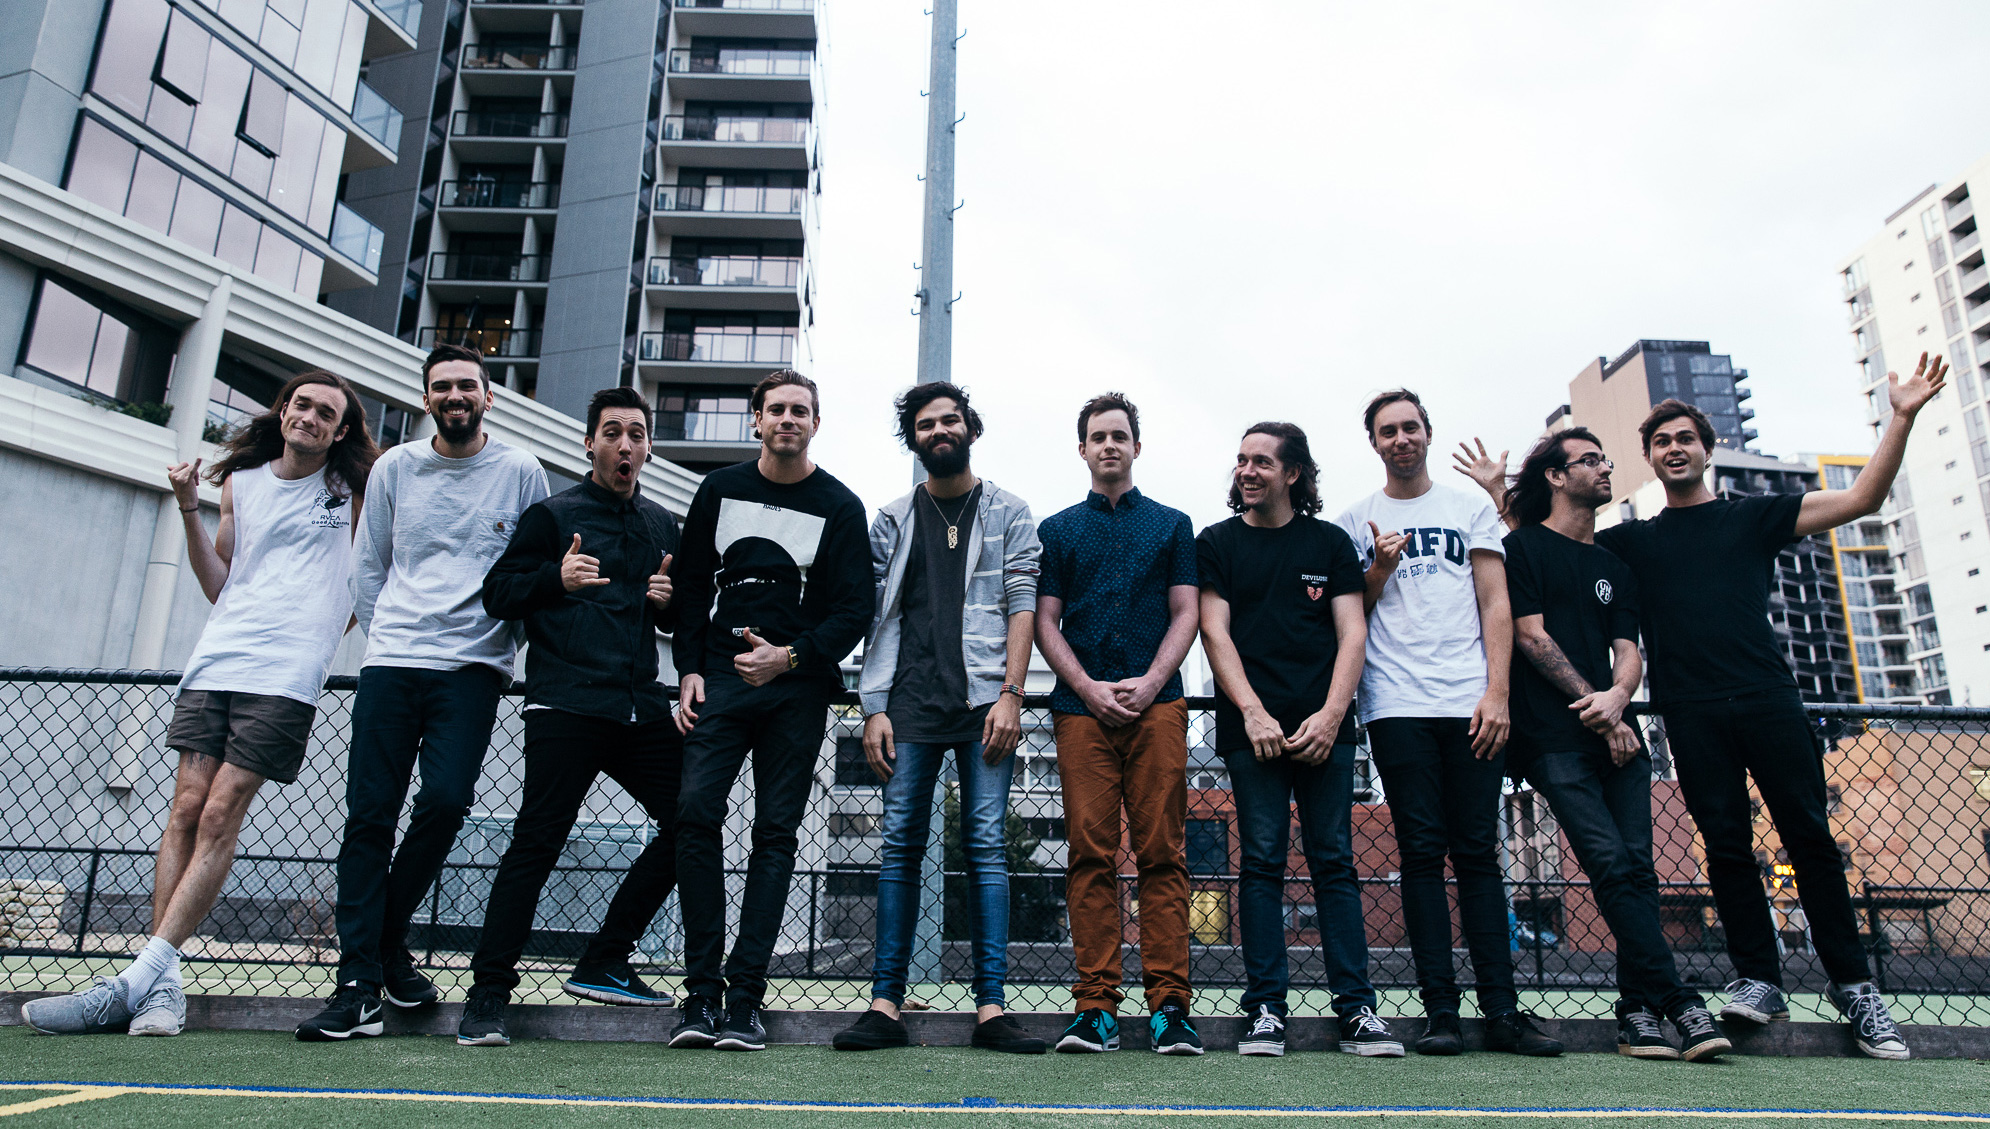 Northlane & In Hearts Wake release surprise EP